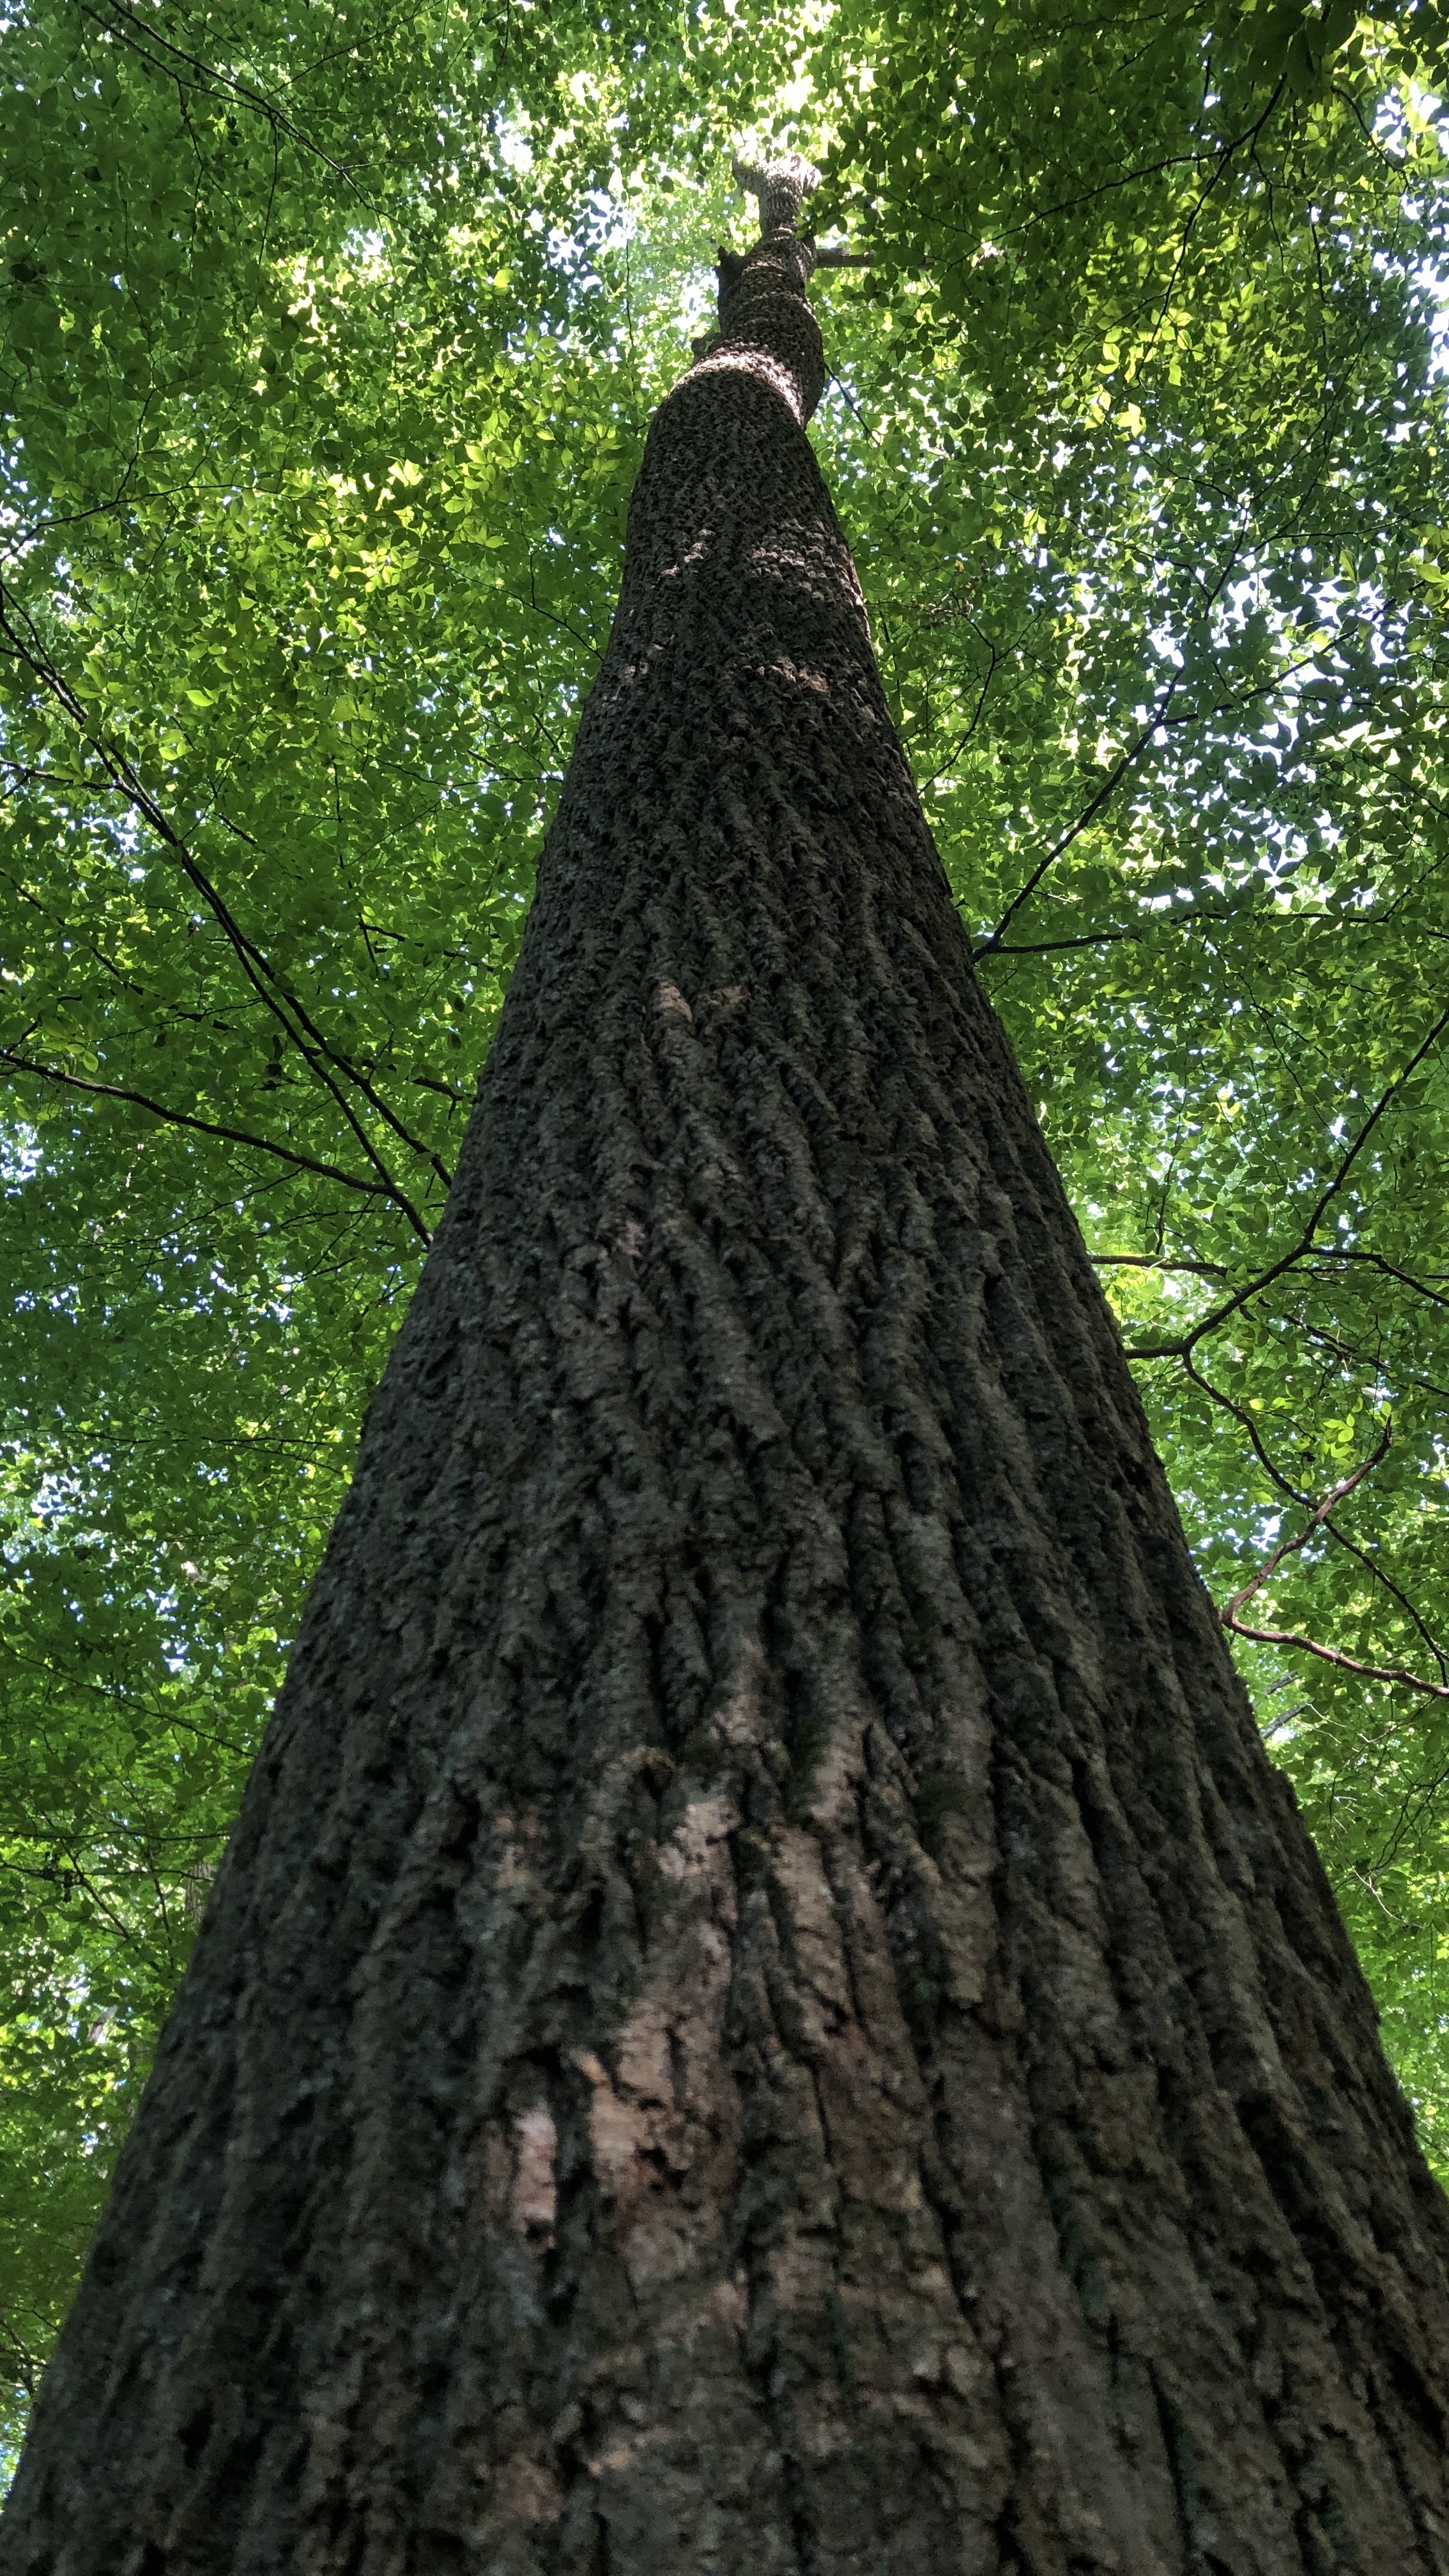 Tulip Poplar trunk and canopy find them in Reston, Herndon, and Great Falls, VA